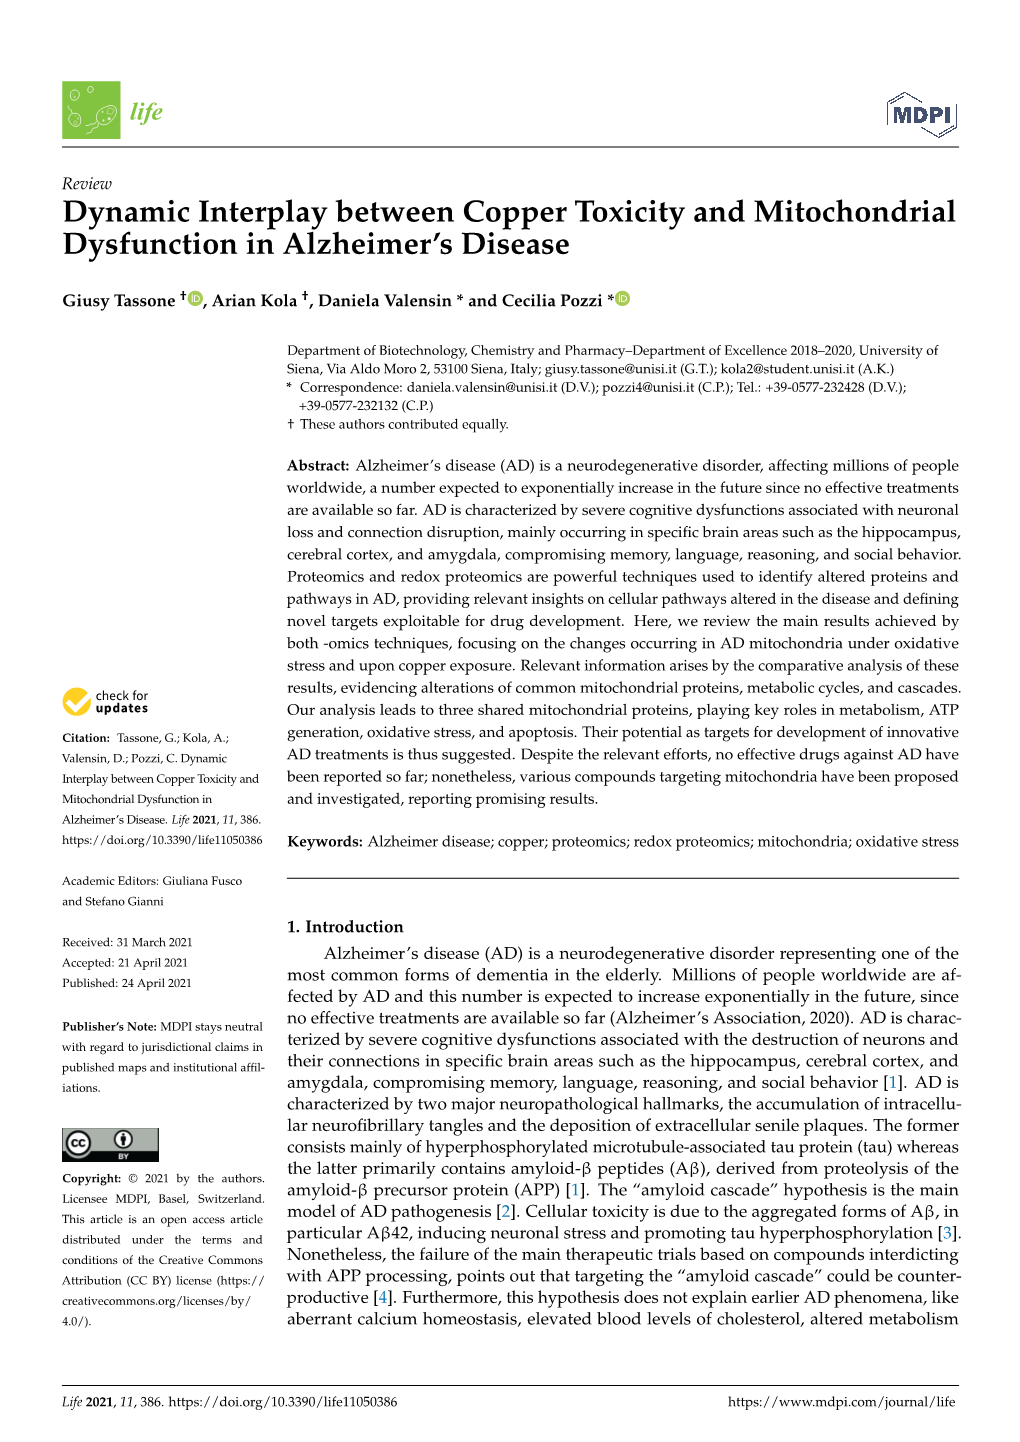 Dynamic Interplay Between Copper Toxicity and Mitochondrial Dysfunction in Alzheimer’S Disease